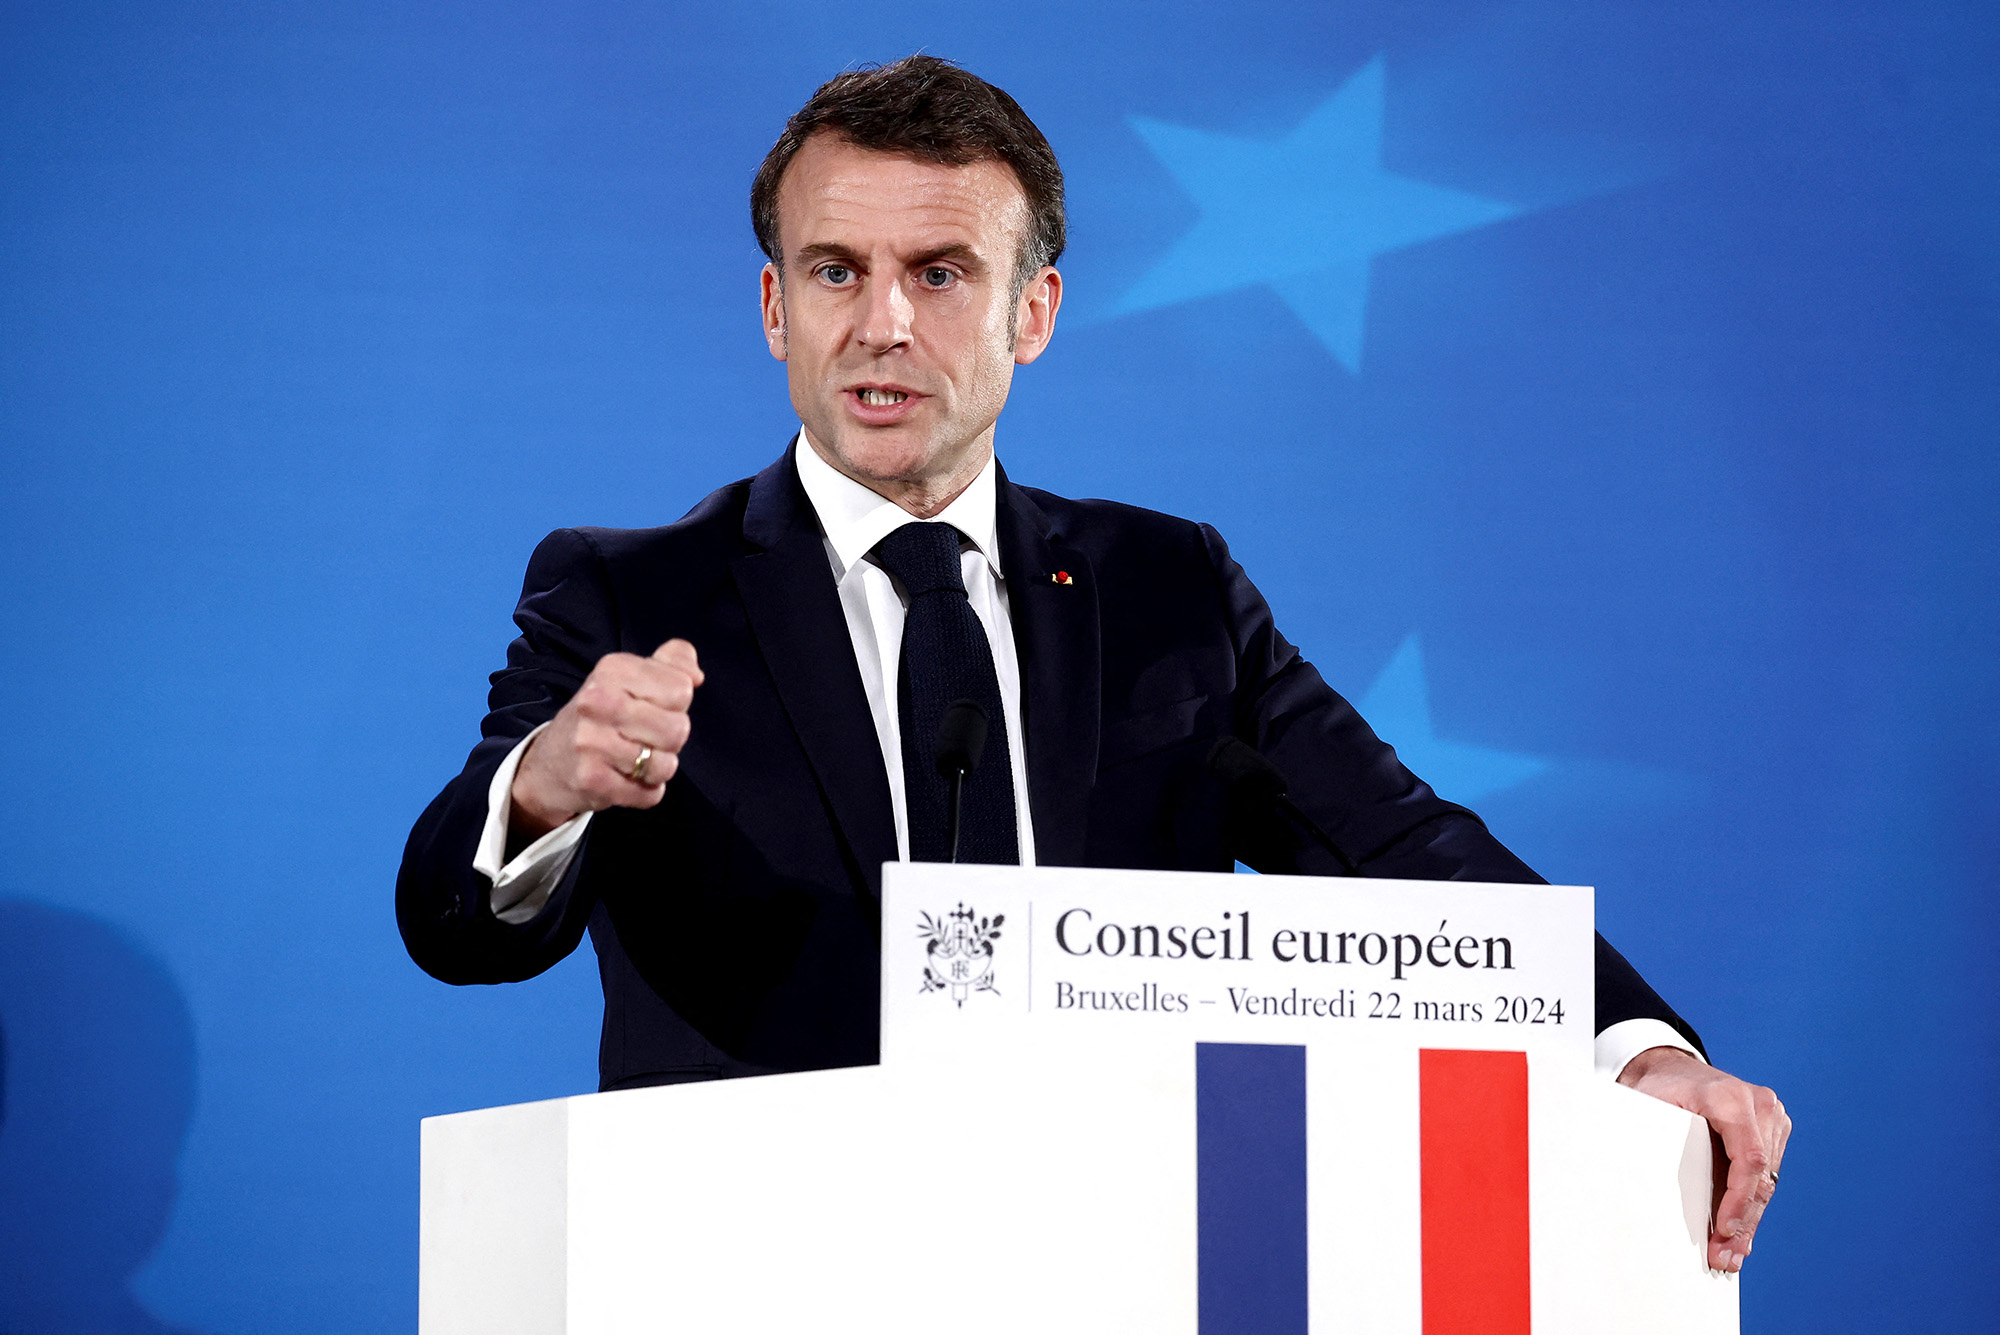 French President Emmanuel Macron attends a press conference on the day of a European Union leaders summit in Brussels, Belgium, on March 22.